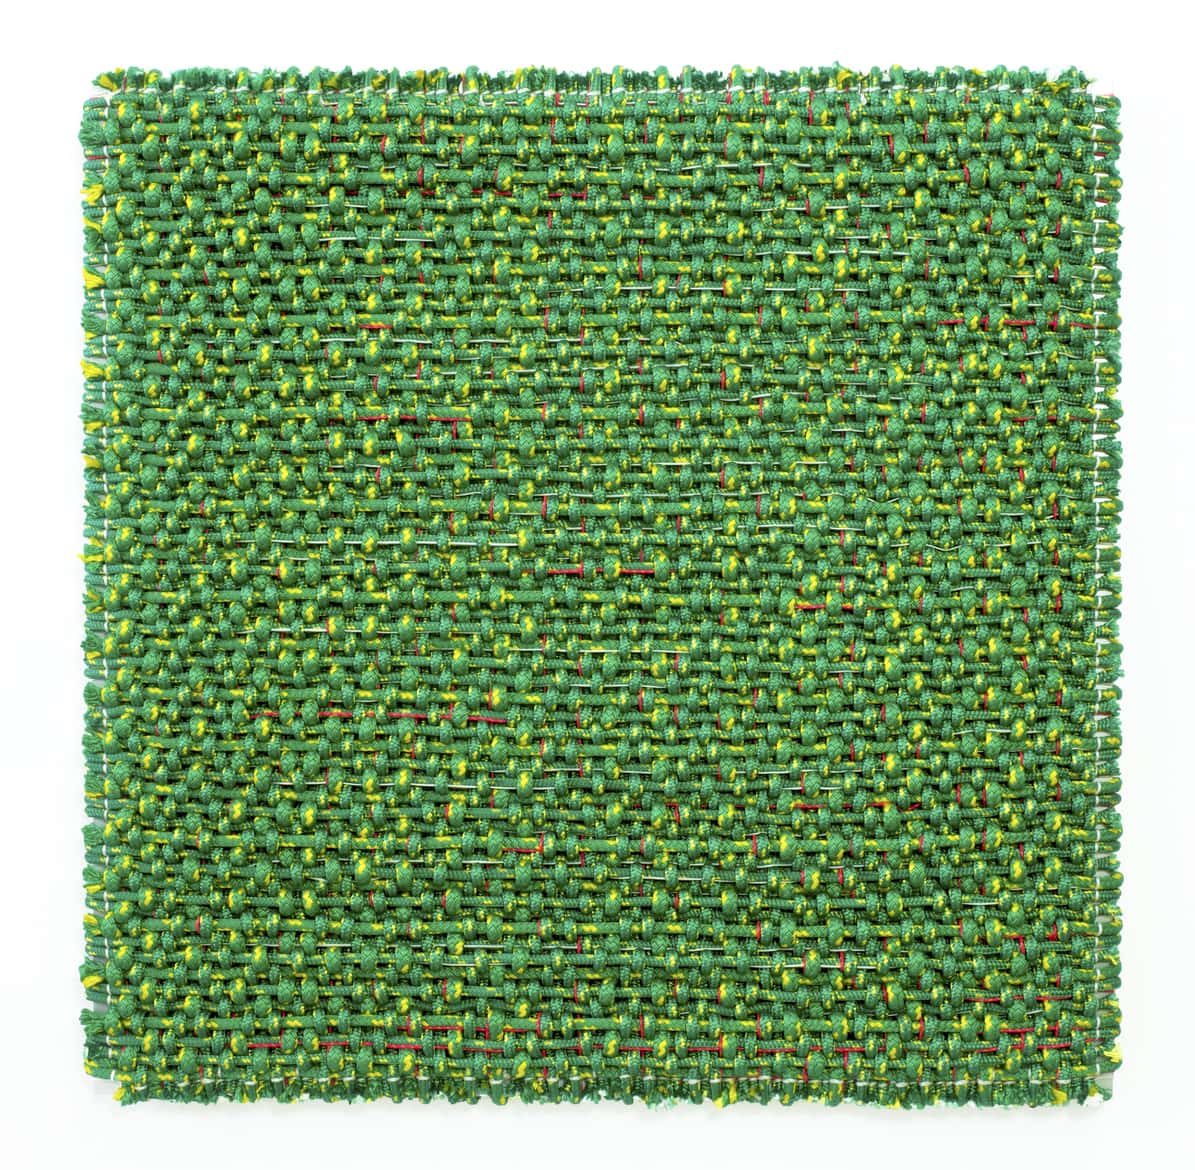 'Composition in Blue and Green', 2018, polyester and aluminium, 112 x 112 x 8cm